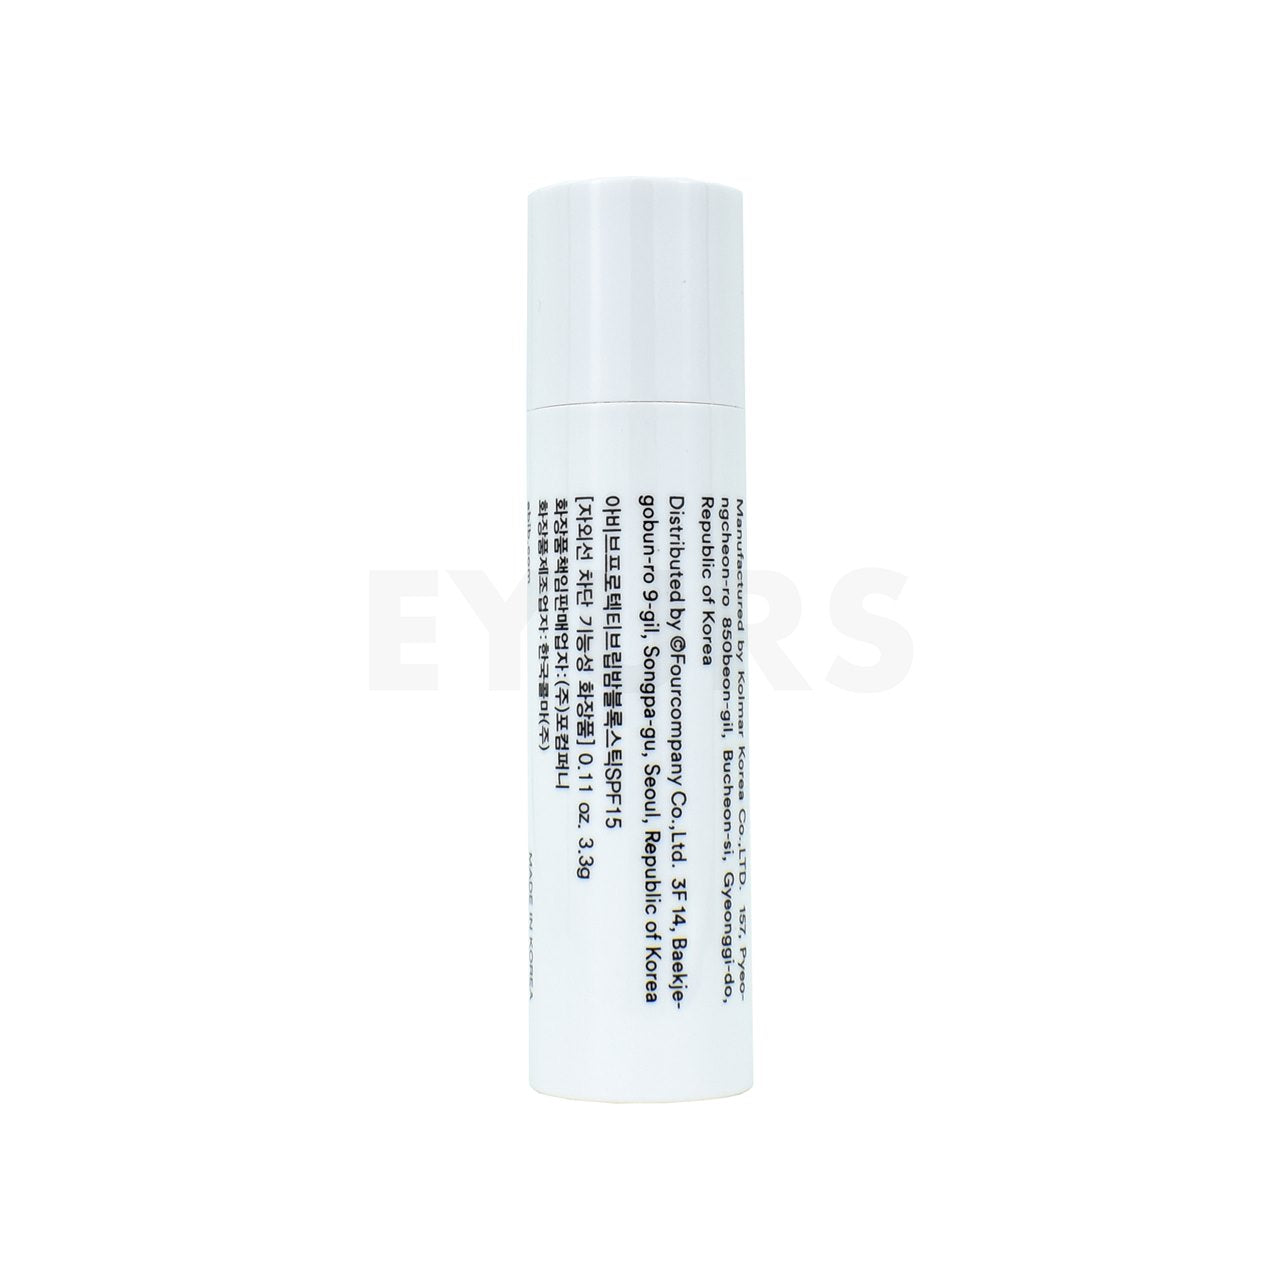 abib protective lip balm block stick front side packaging back of product